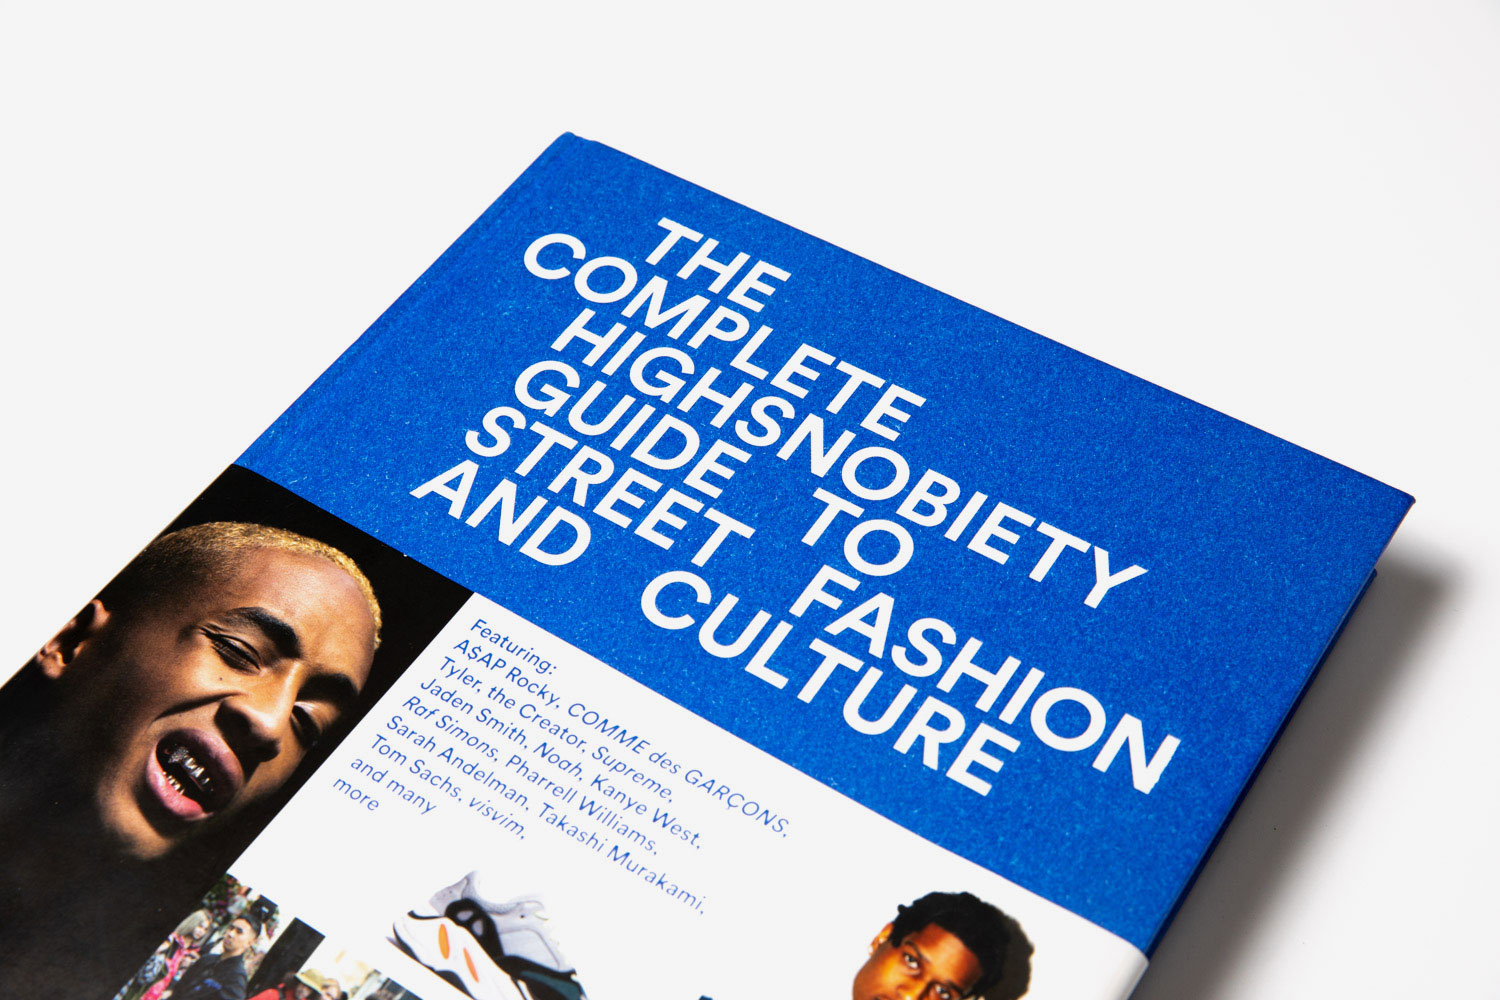 runway meets street according highsnobiety main 2 The Incomplete Highsnobiety Guide to Street Fashion and Culture street wear